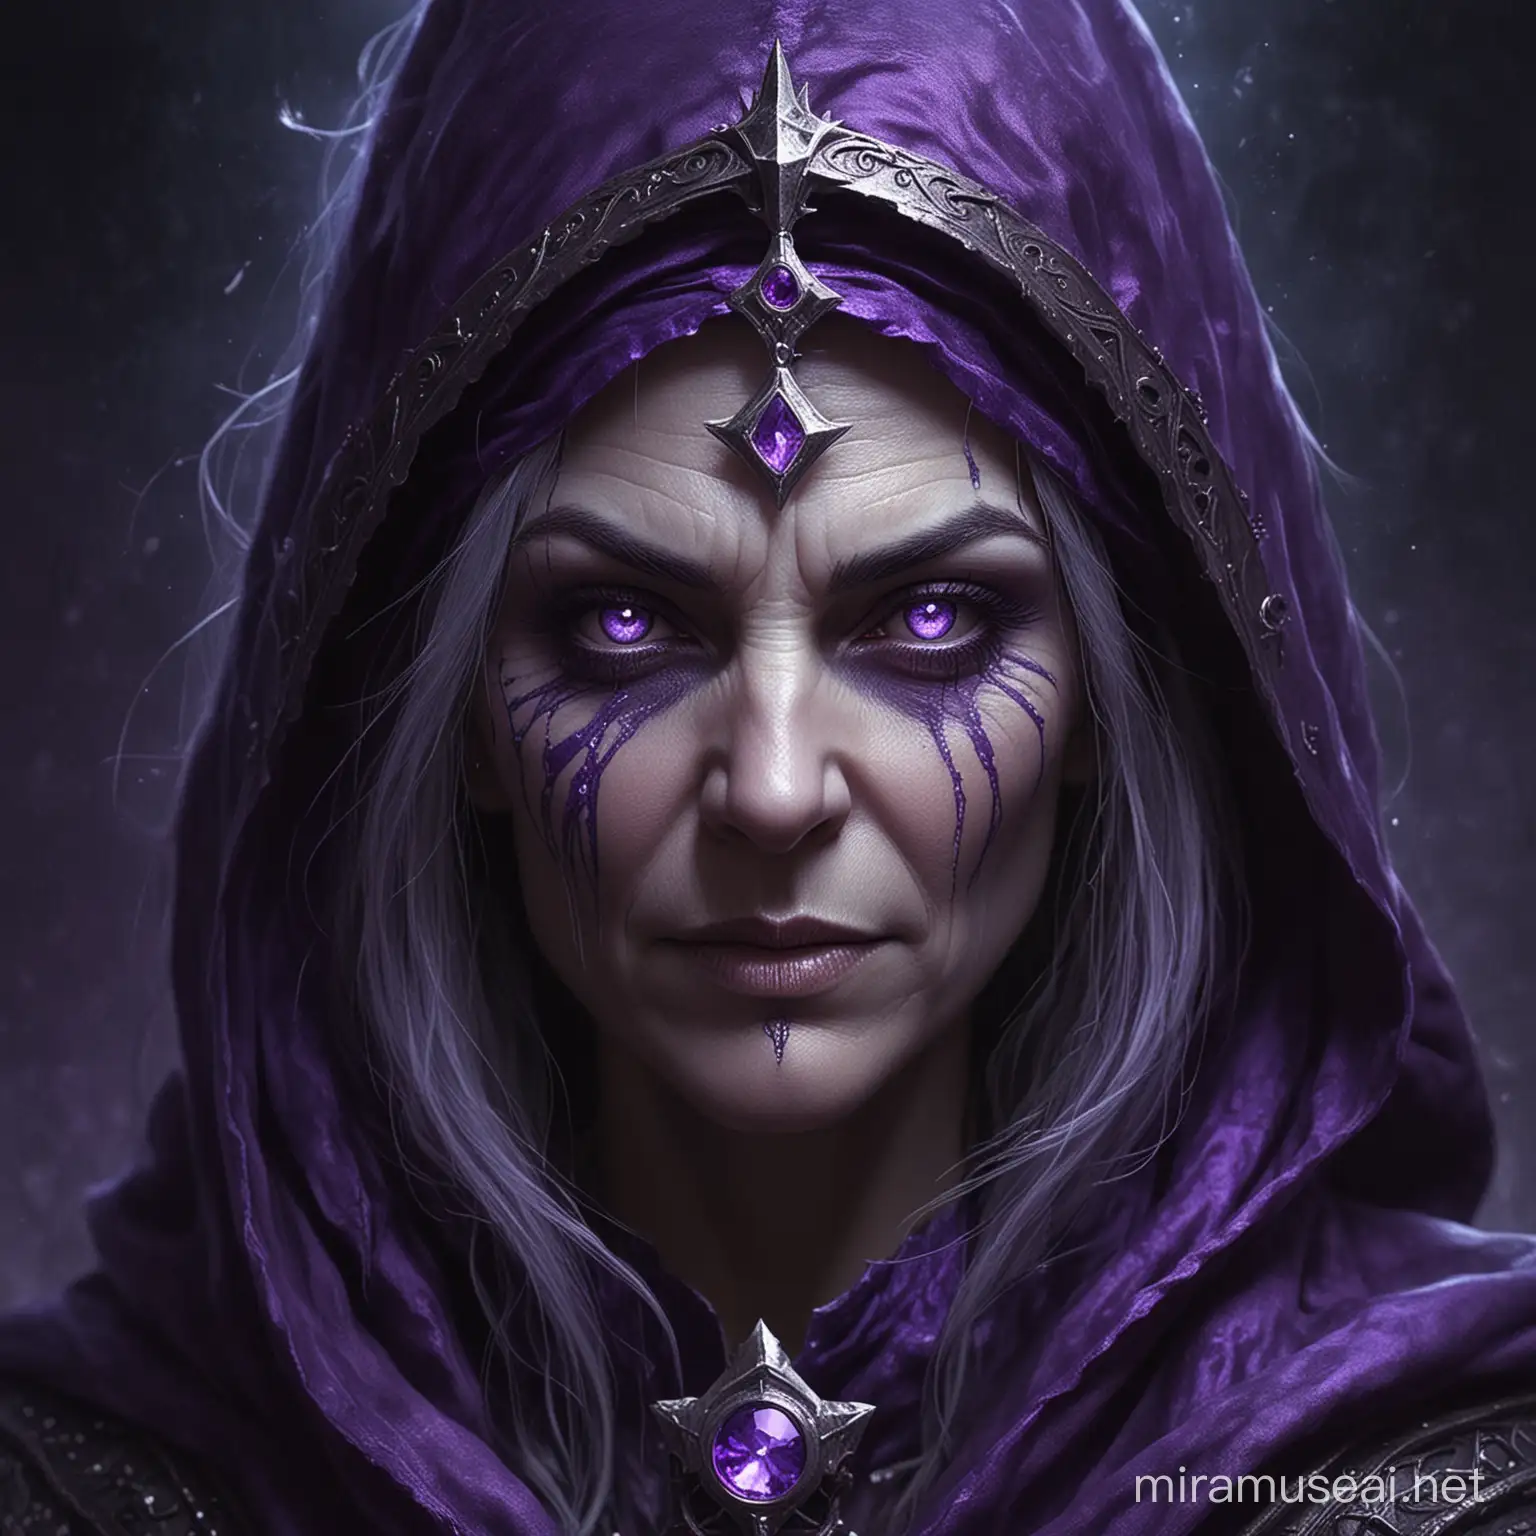 The sorceress queen who has a mysterious face is the most powerful wizard in the world.
( The image should not be too colorful but have purple hues inside ) 
(Average and somewhat elderly face)
(Mysterious and sinister face)